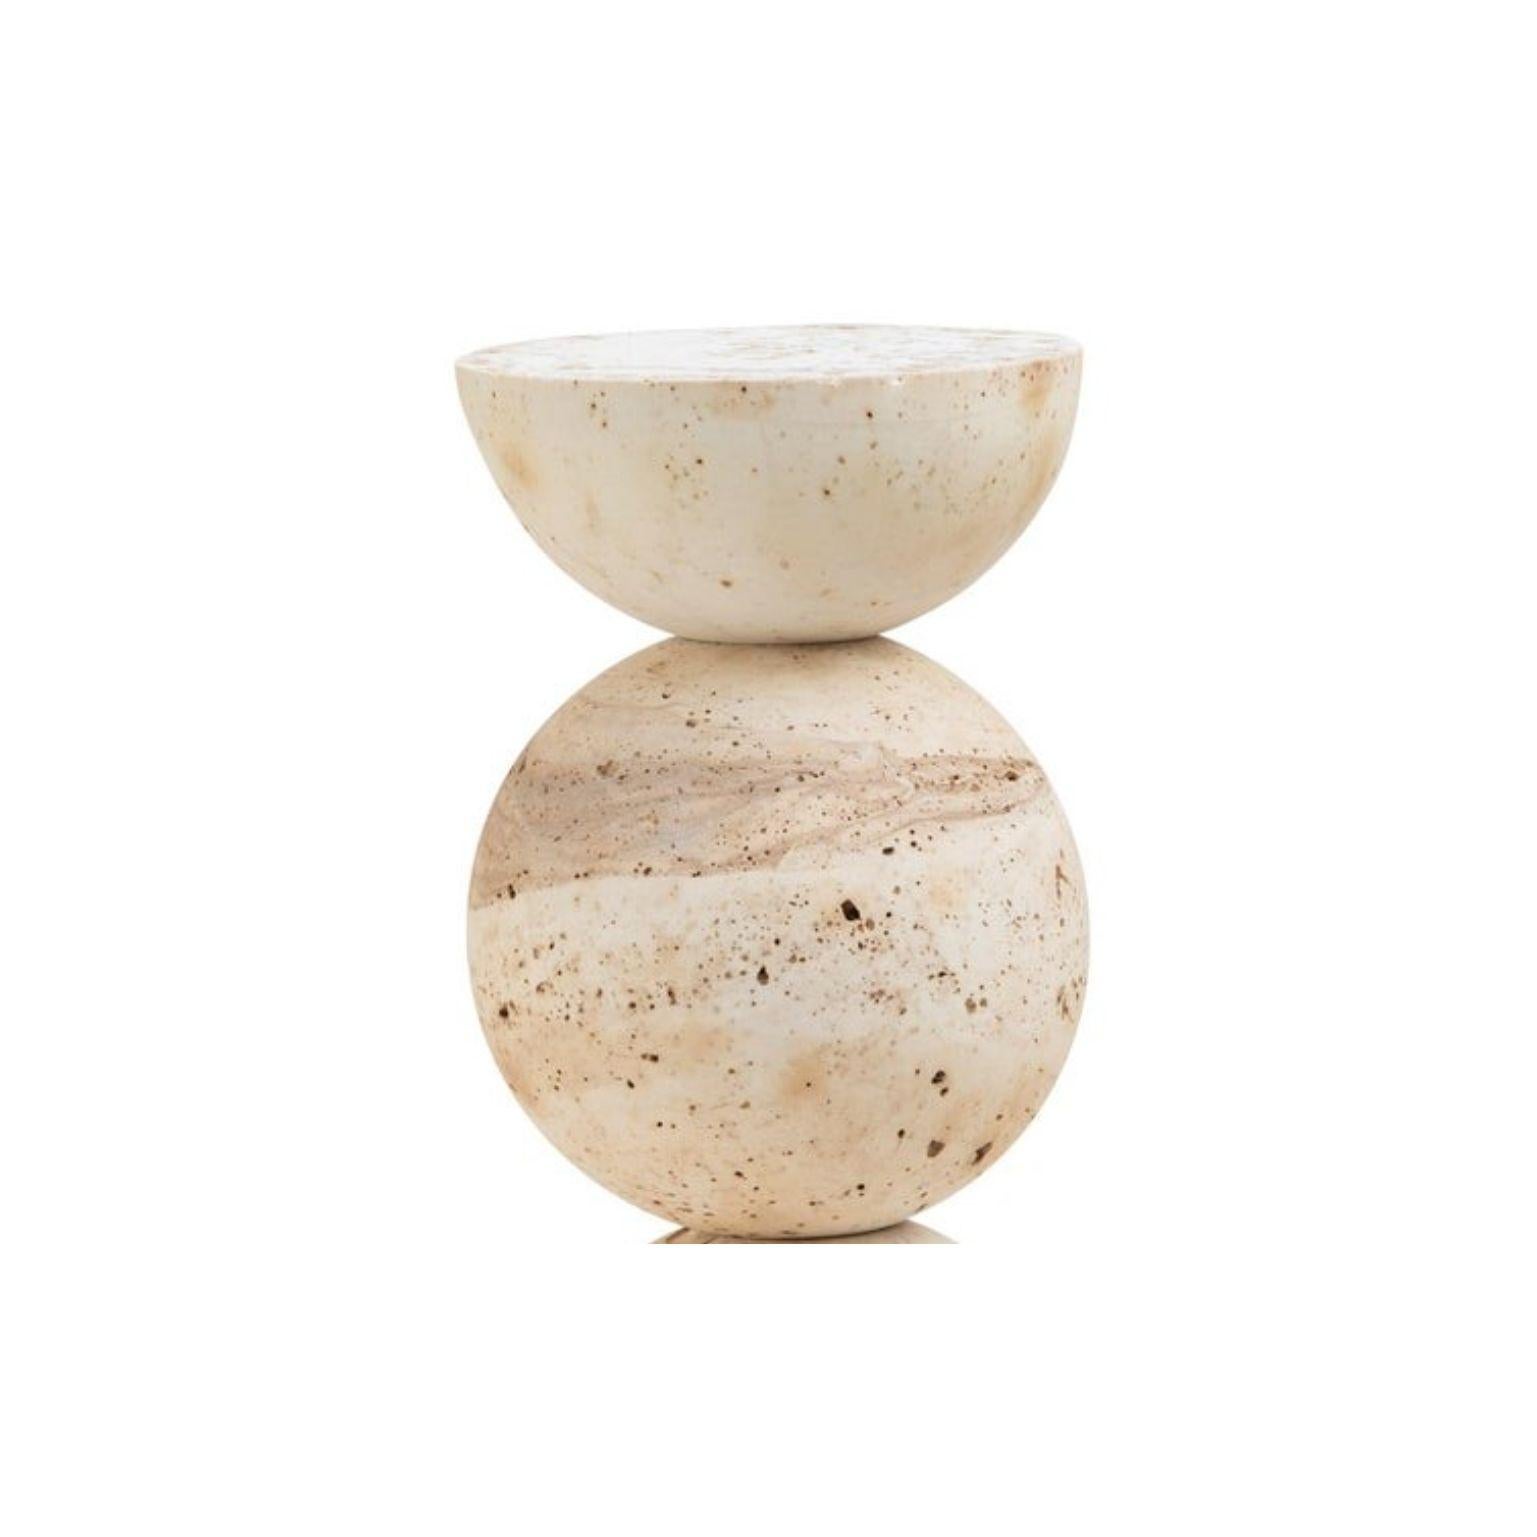 Jupiter 1 half moon by Turbina
Future archeology
Dimensions: Ø 19.5 cm x H 29.5 cm
Materials: MDF

Jupiter project arises from the idea of the stone as symbol of sacredness. Therefore Jupiter is a modular piece composed by spheres and semi